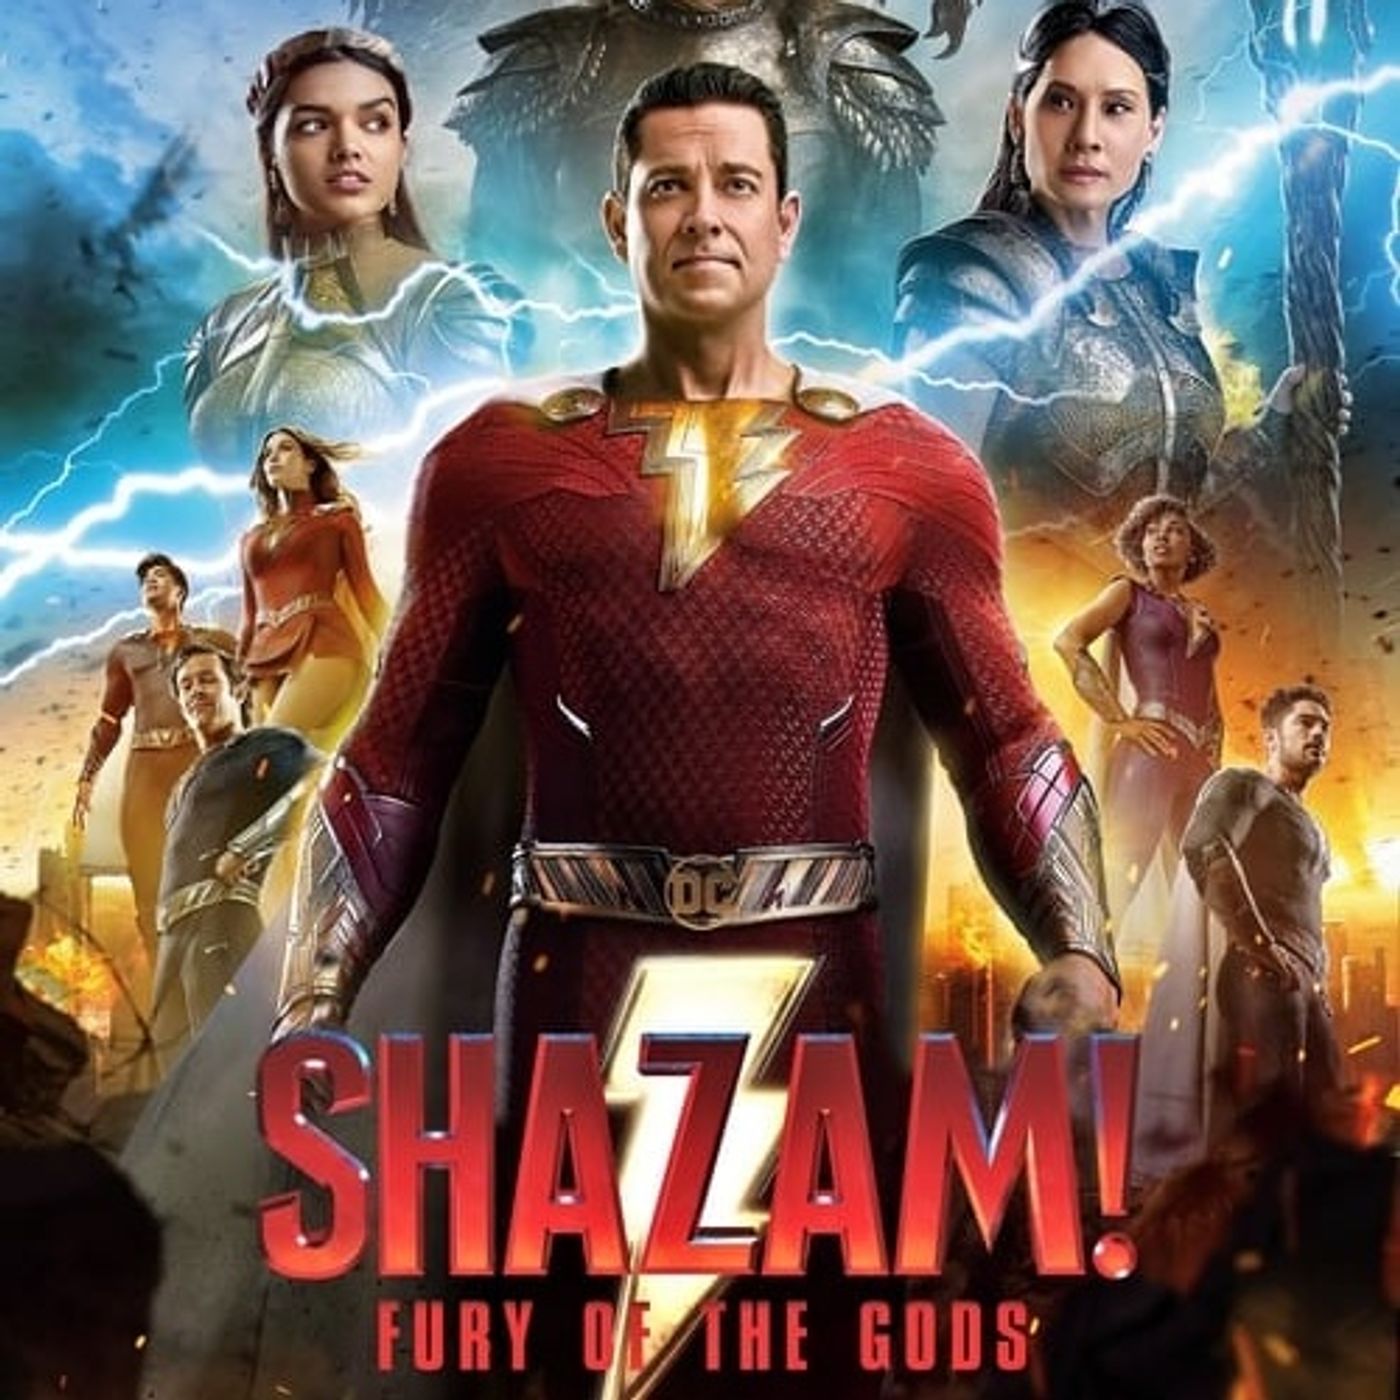 Shazam Fury Of The Two Podcasters That Had To Watch It